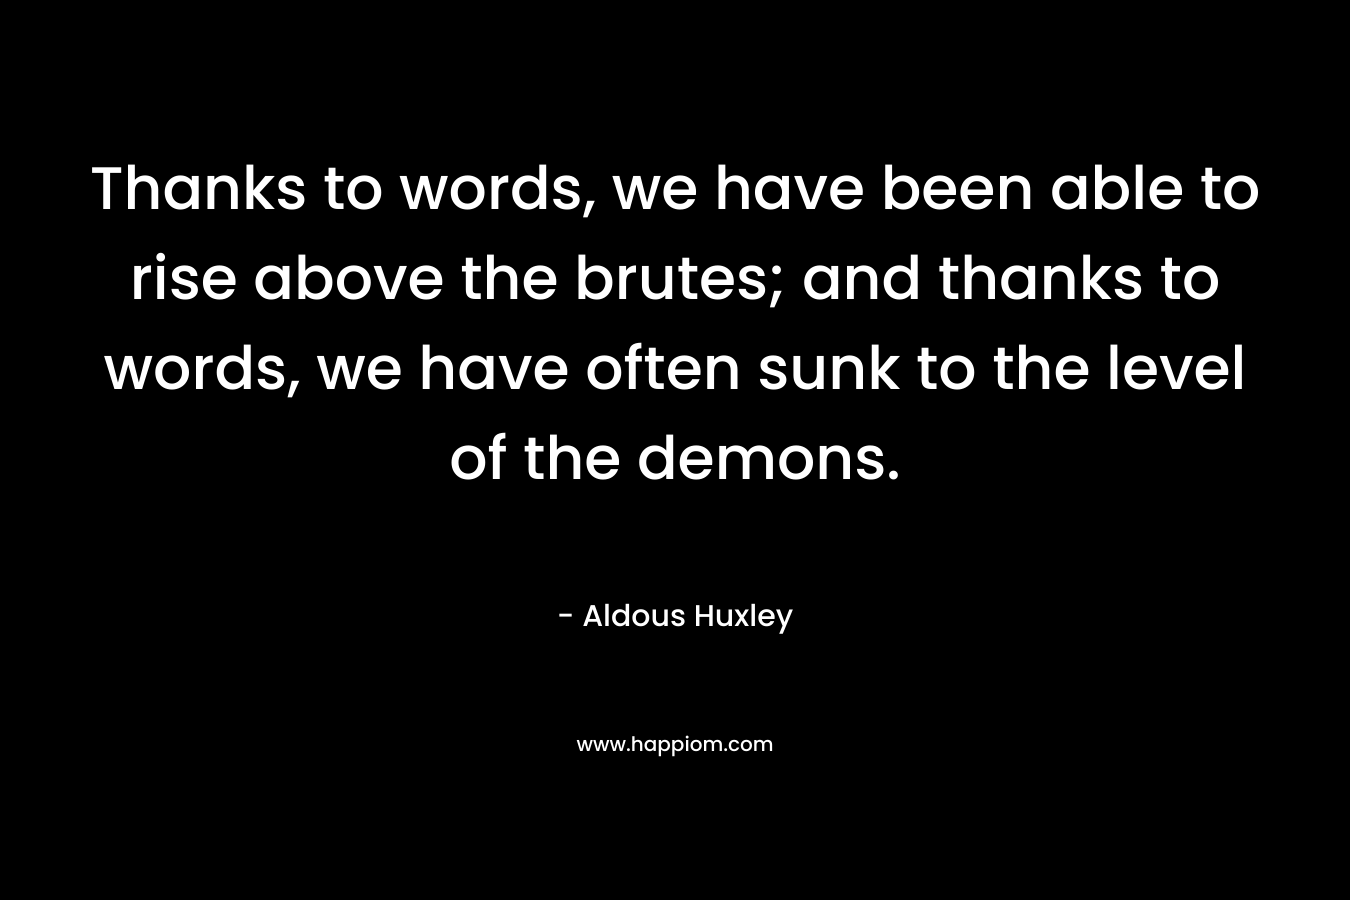 Thanks to words, we have been able to rise above the brutes; and thanks to words, we have often sunk to the level of the demons. – Aldous Huxley